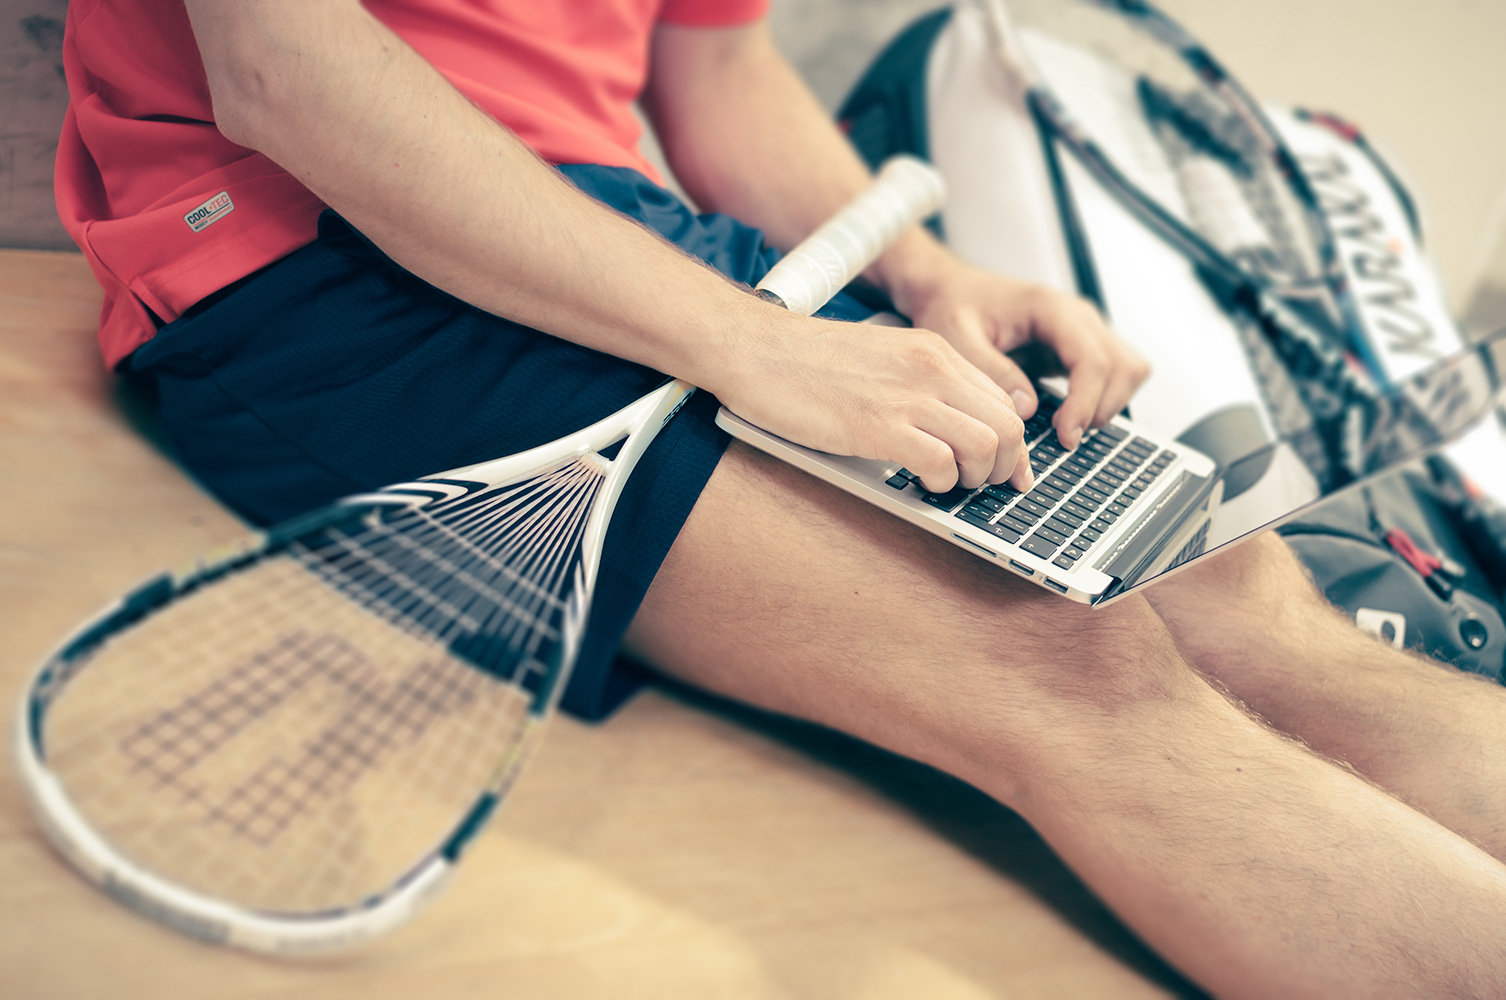 Consumer healthcare decision making illustrated by a man sitting on the ground with both a laptop and a tennis racket on his lap.